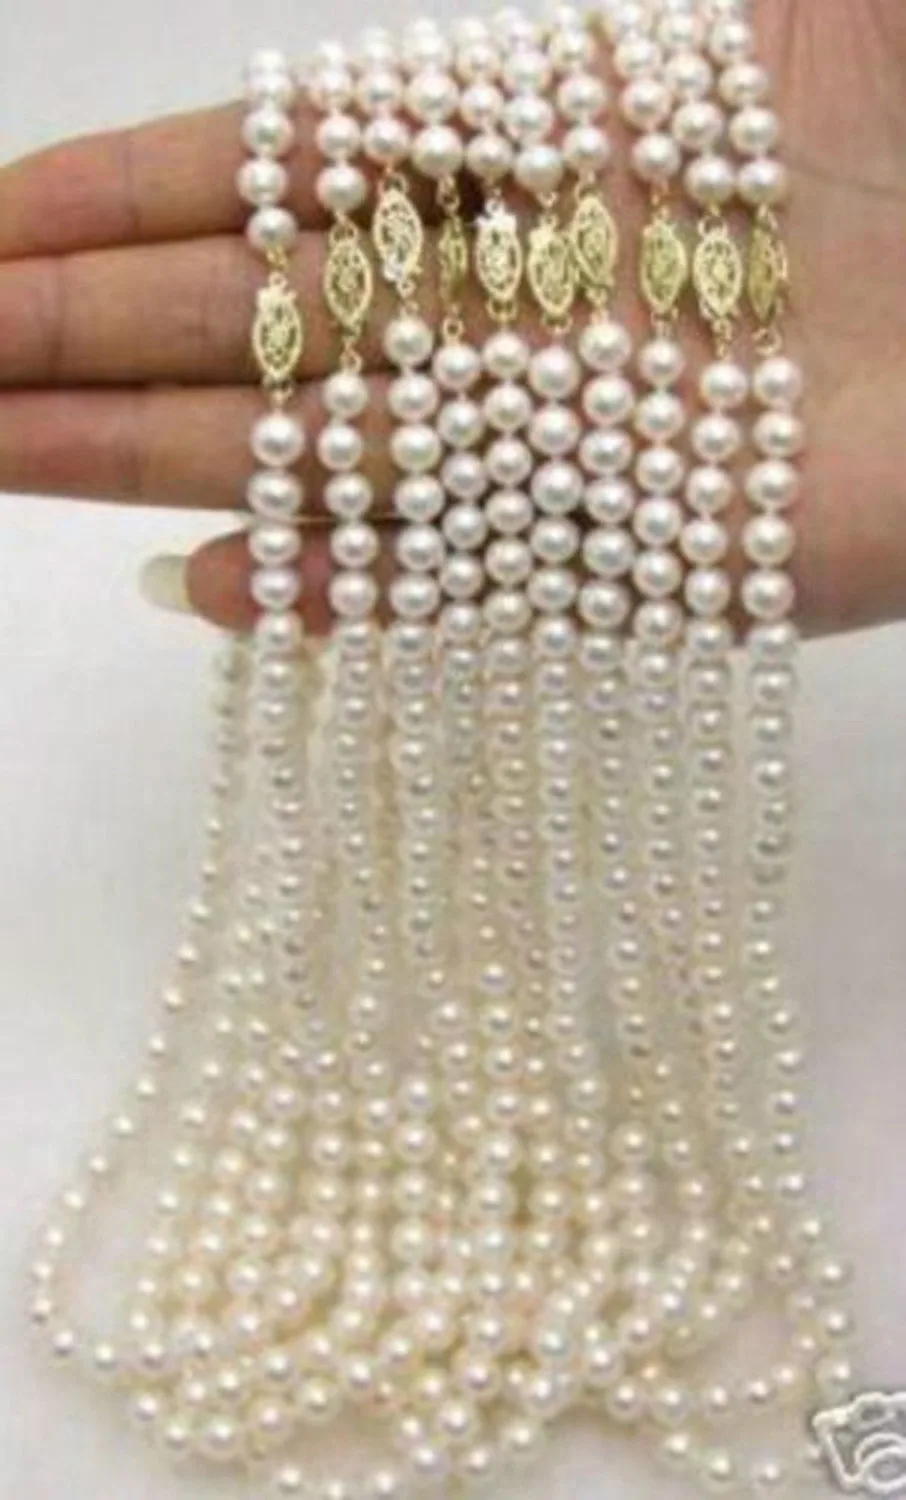 

Hot sale new Style >>>>>WHOLESALE 10PC 6-7MM WHITE AKOYA CULTURED PEARL NECKLACE 18"AA